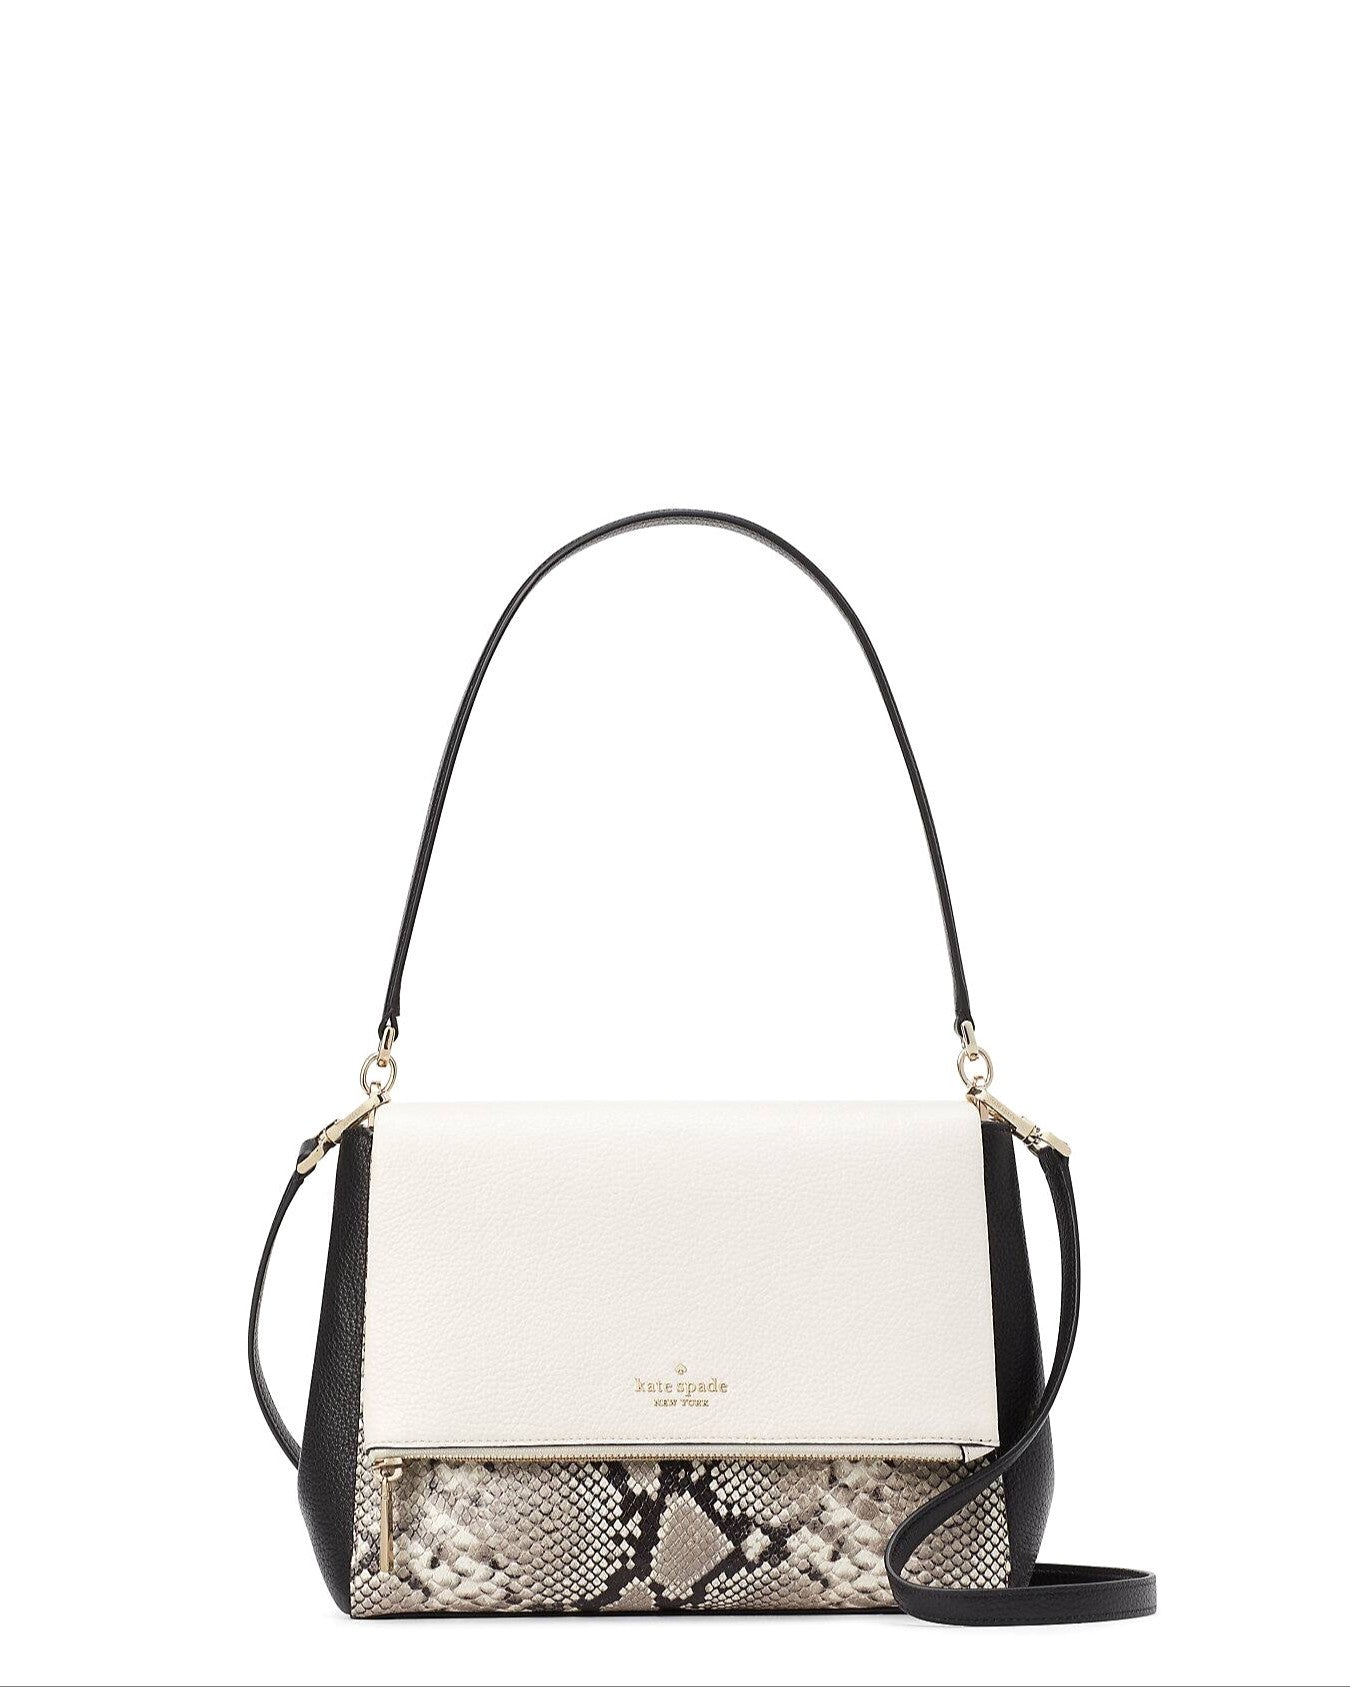 Roulette Small Saddle Bag | Kate Spade New York